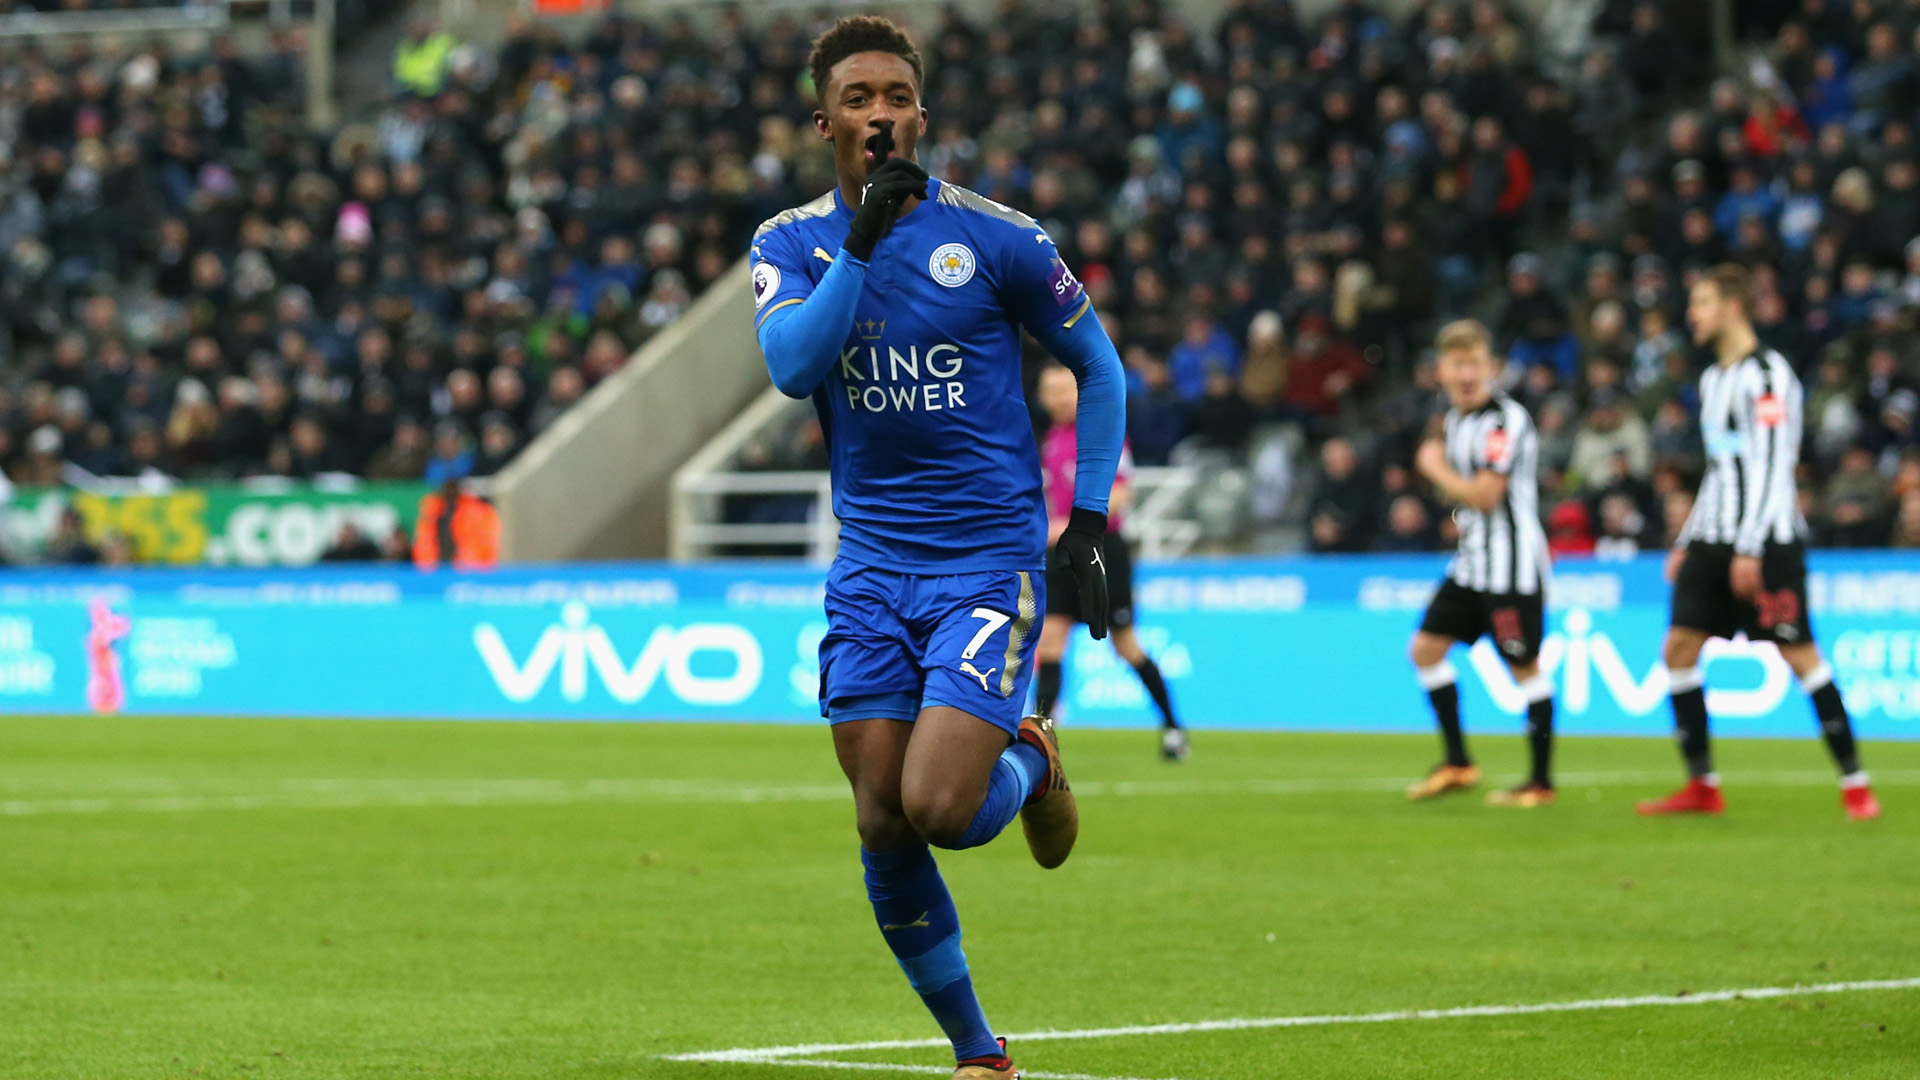 Leicester City winger Demarai Gray silences the crowd after scoring. (Getty Images)